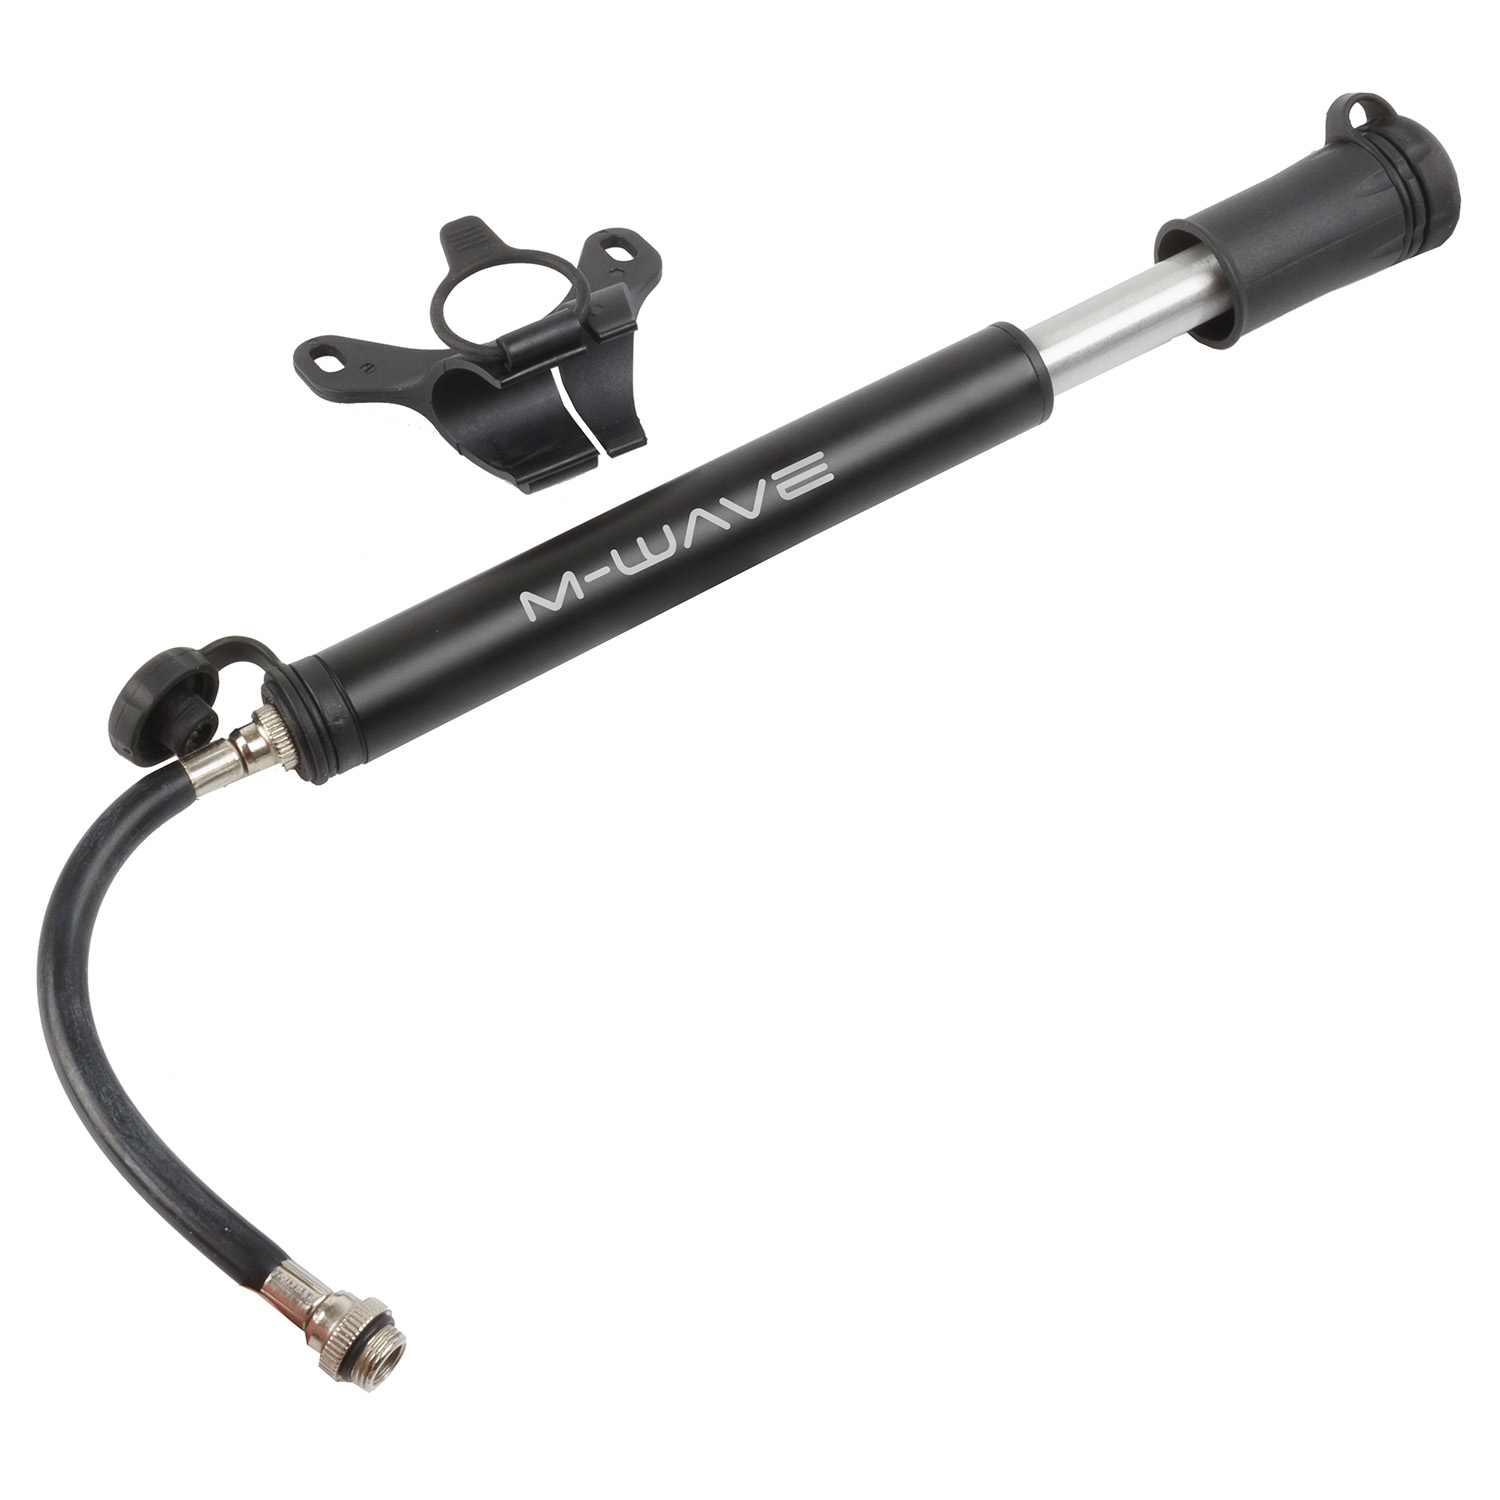 470280 M-WAVE Flexi Tube air pump – AVAILABLE IN SELECTED BIKE SHOPS